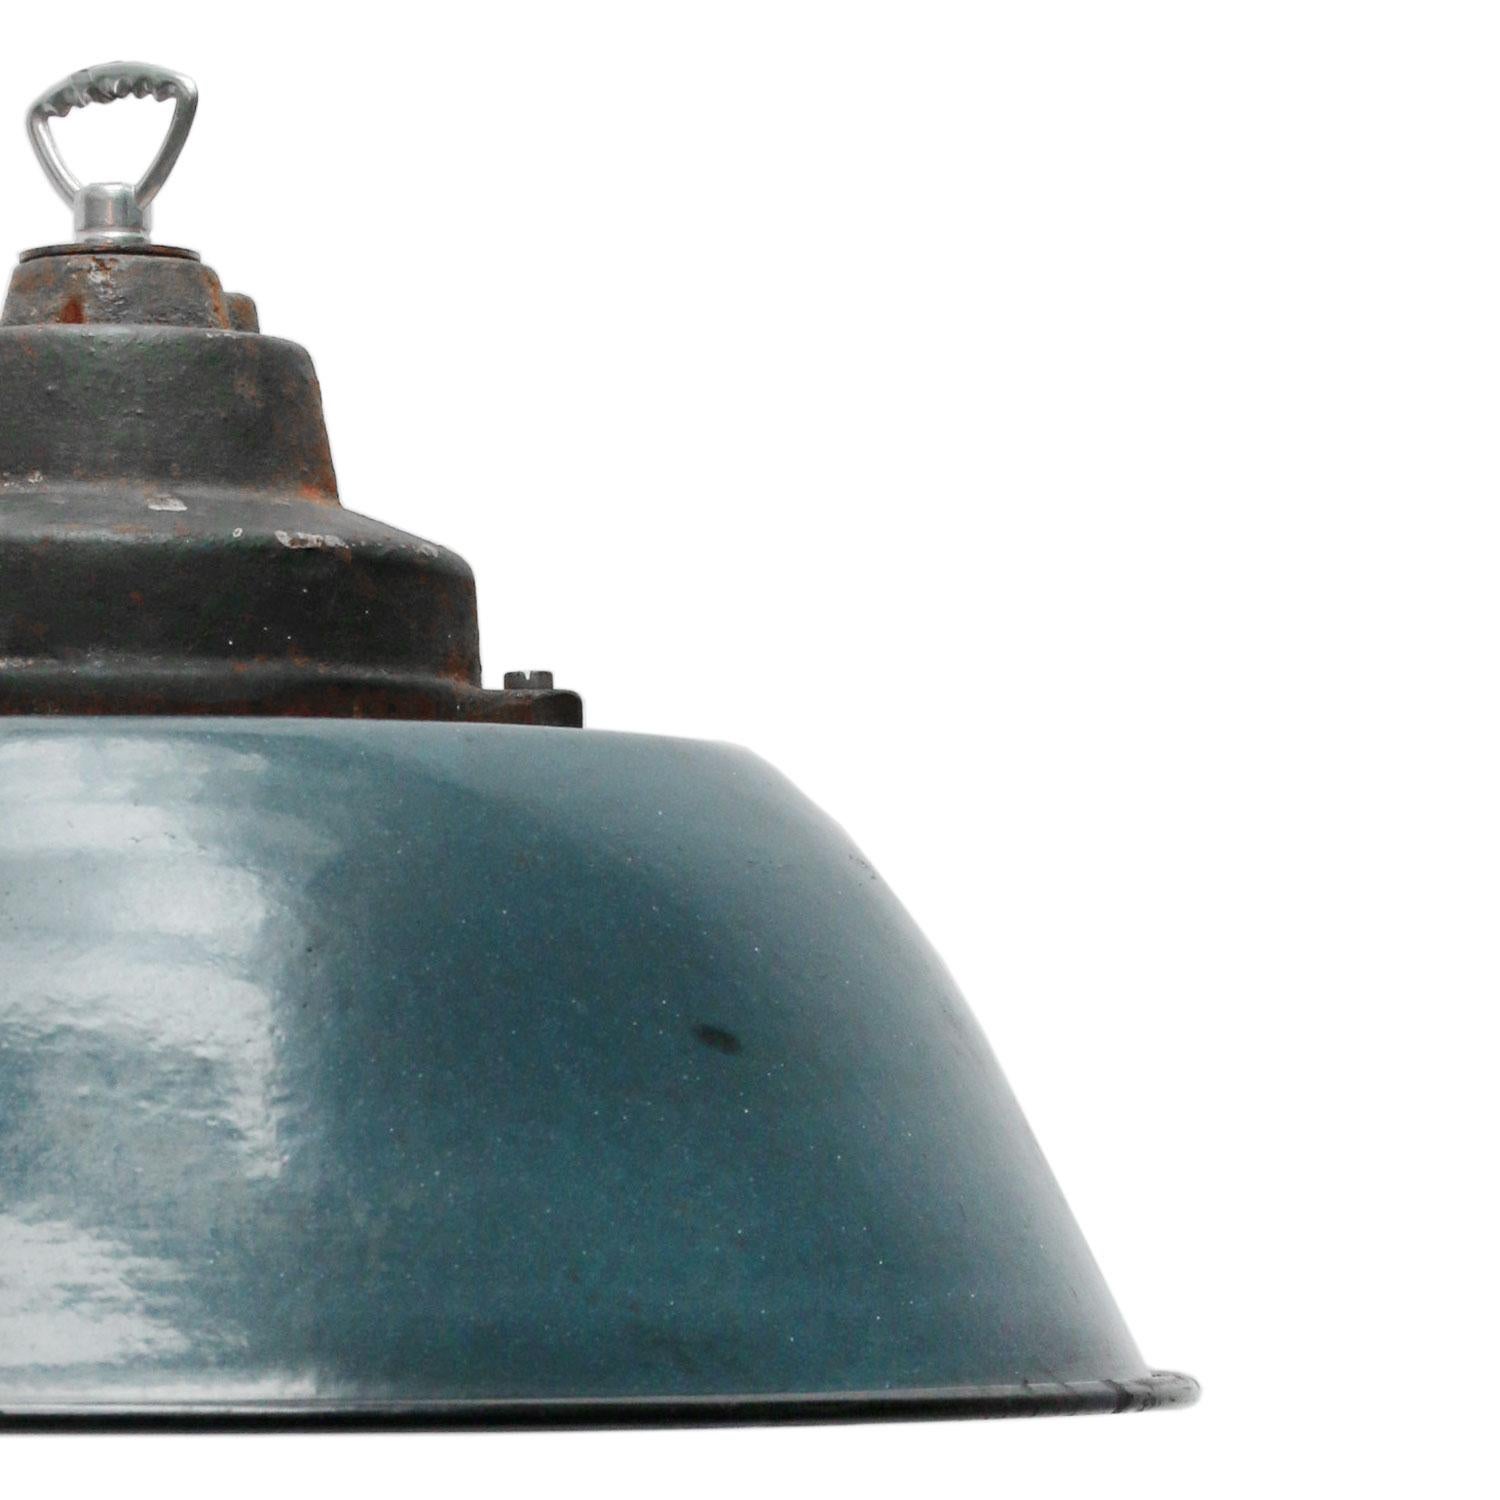 Factory pendant. Blue enamel with white interior. Cast iron top.

Weight: 3.2 kg / 7.1 lb

Priced per individual item. All lamps have been made suitable by international standards for incandescent light bulbs, energy-efficient and LED bulbs.